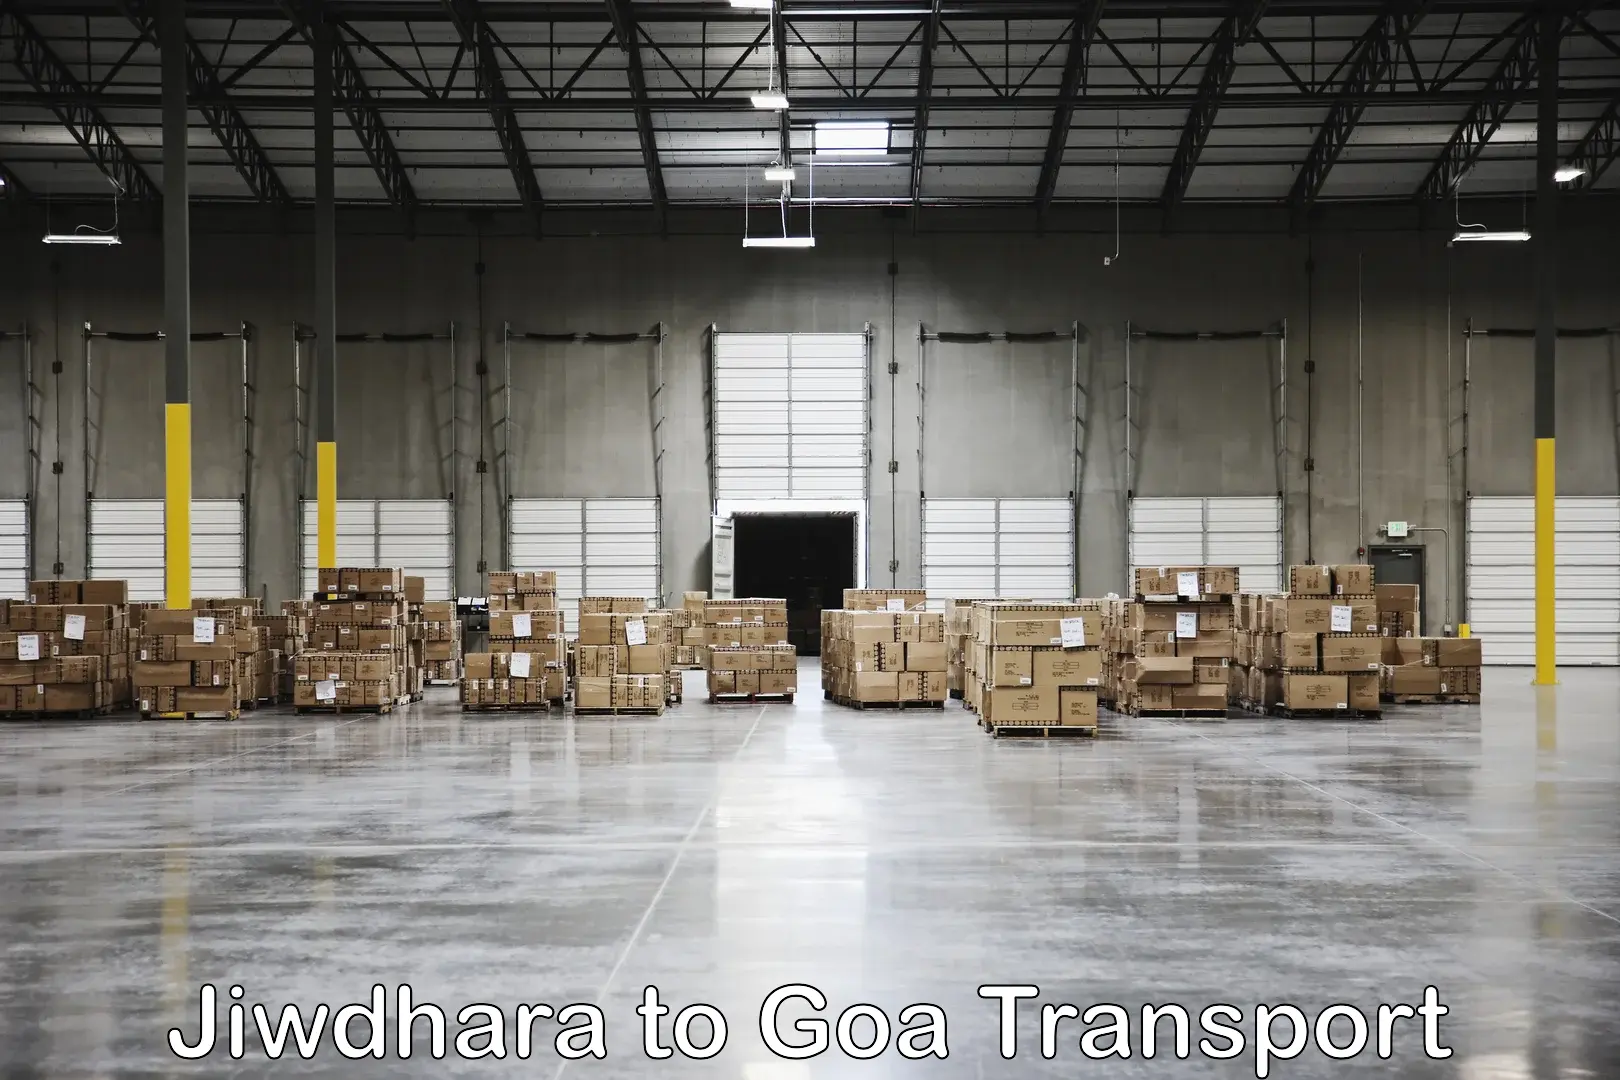 Transport bike from one state to another Jiwdhara to Goa